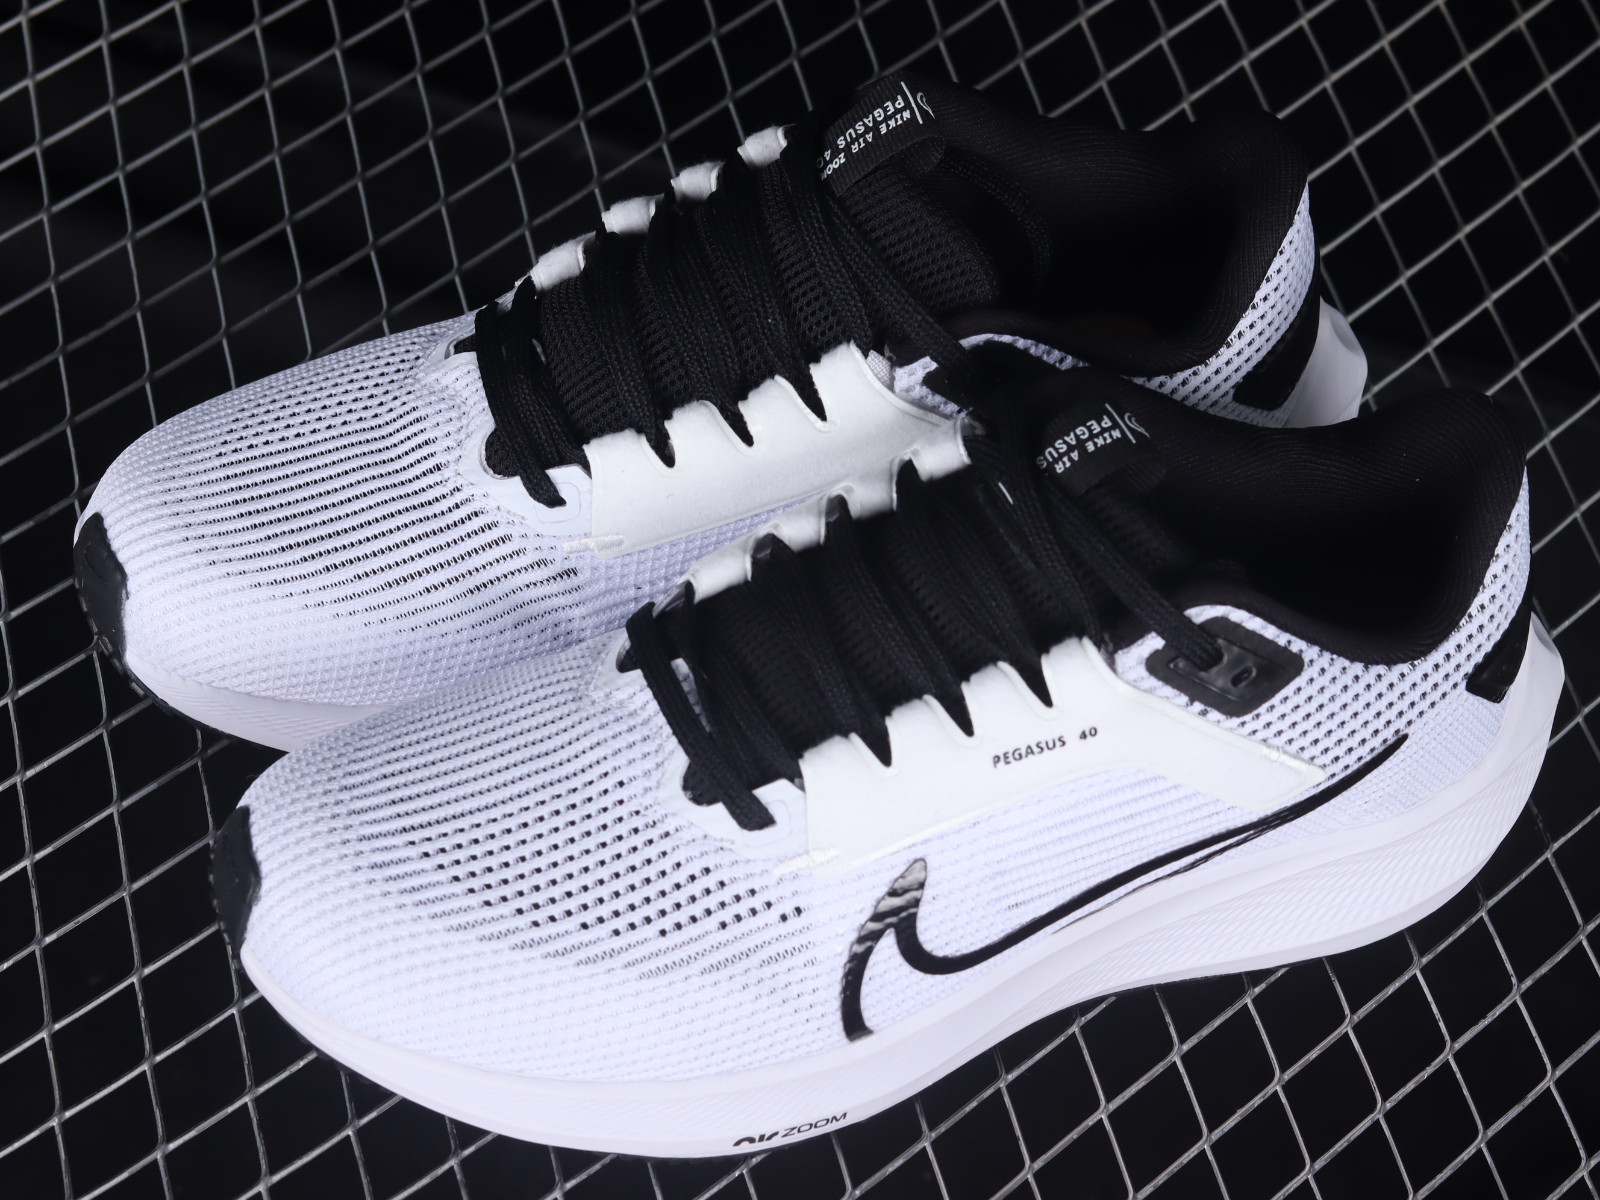 Seem Accusation Literacy Nike Air Zoom Pegasus 40 White Black DV3854 - MultiscaleconsultingShops -  nike air thin sole sneakers shoes sale - 102